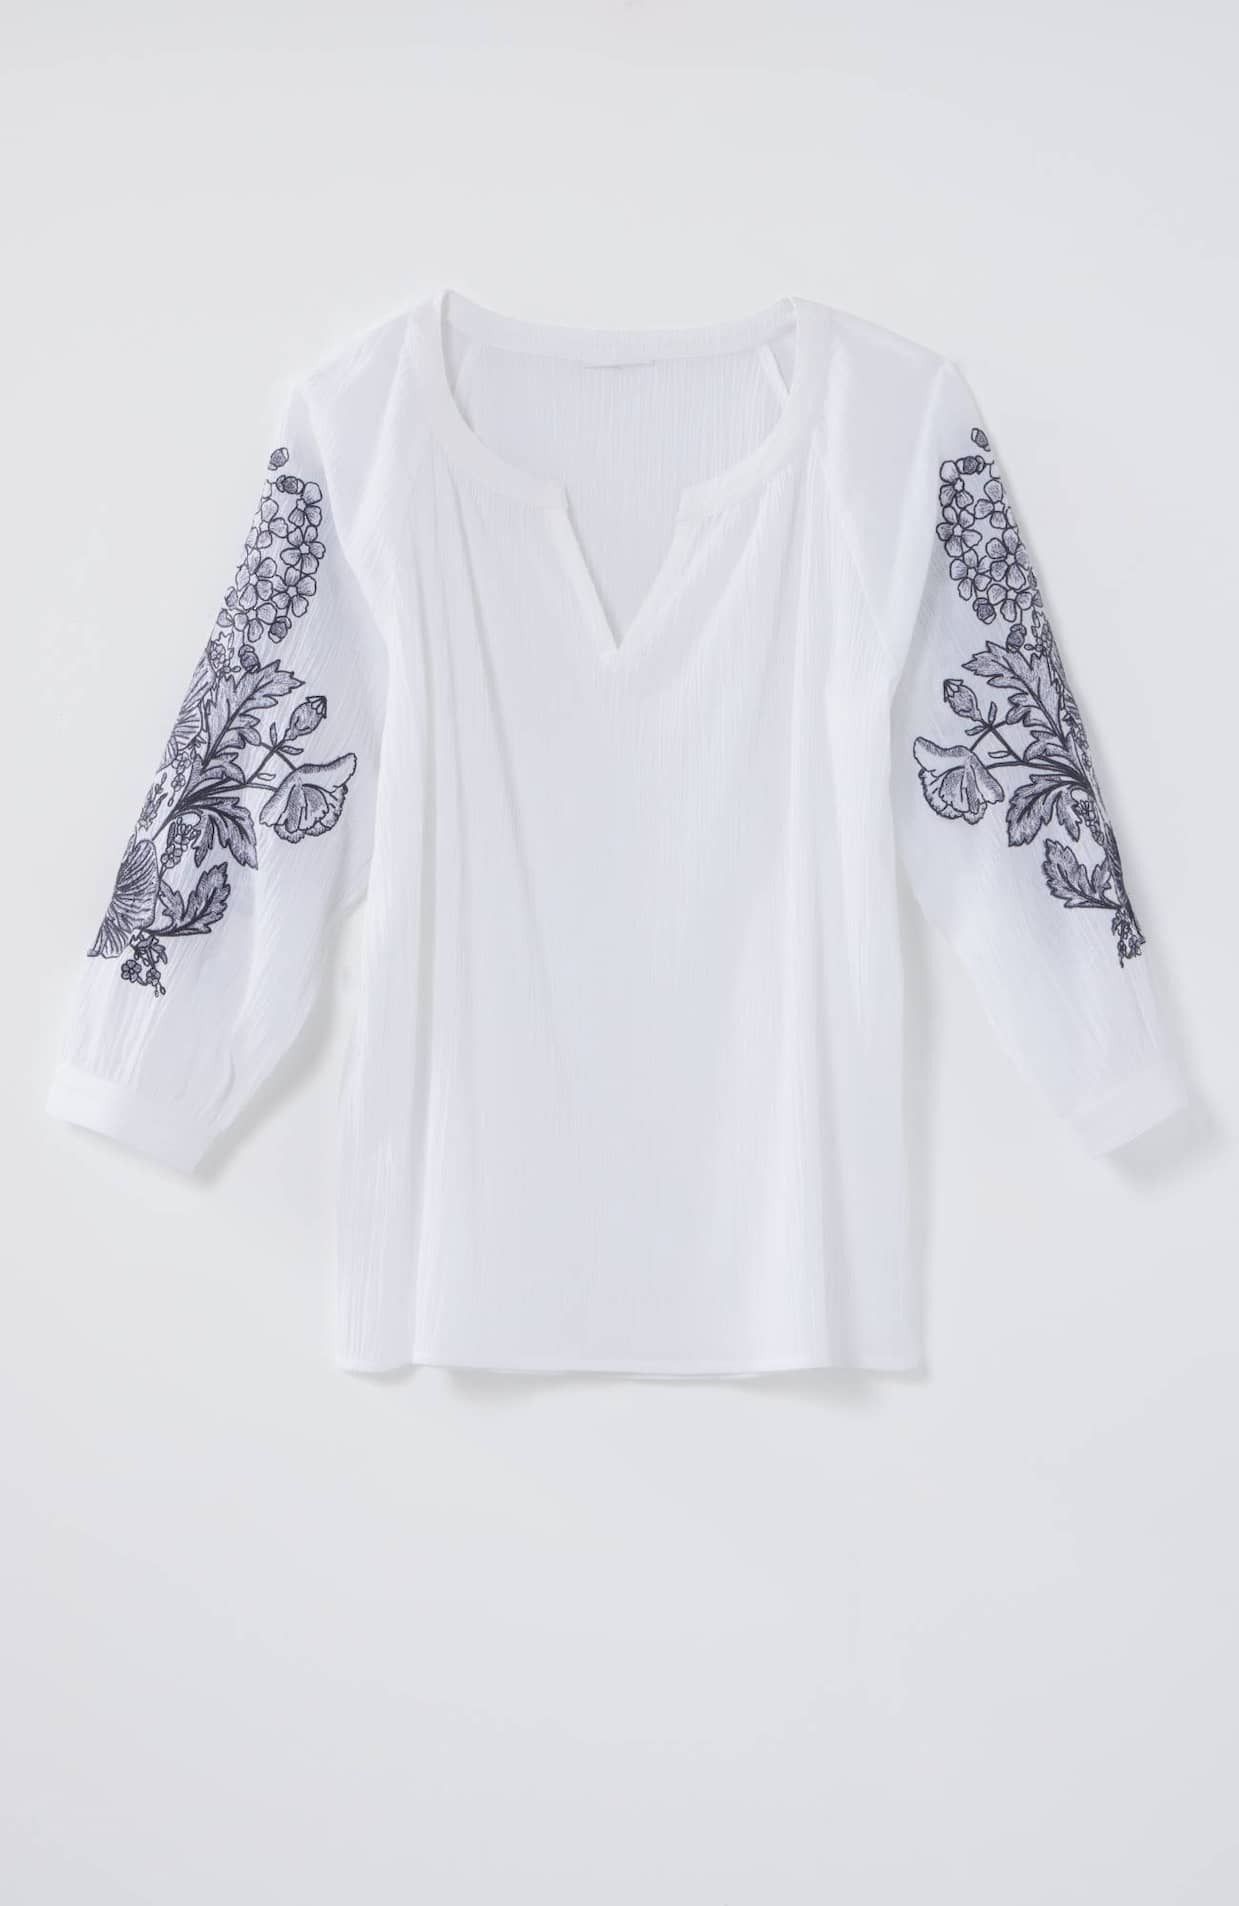 J. Jill ~ XL ~ NEW Very Pretty Embroidered Printed Top ~ NWT (2M5)